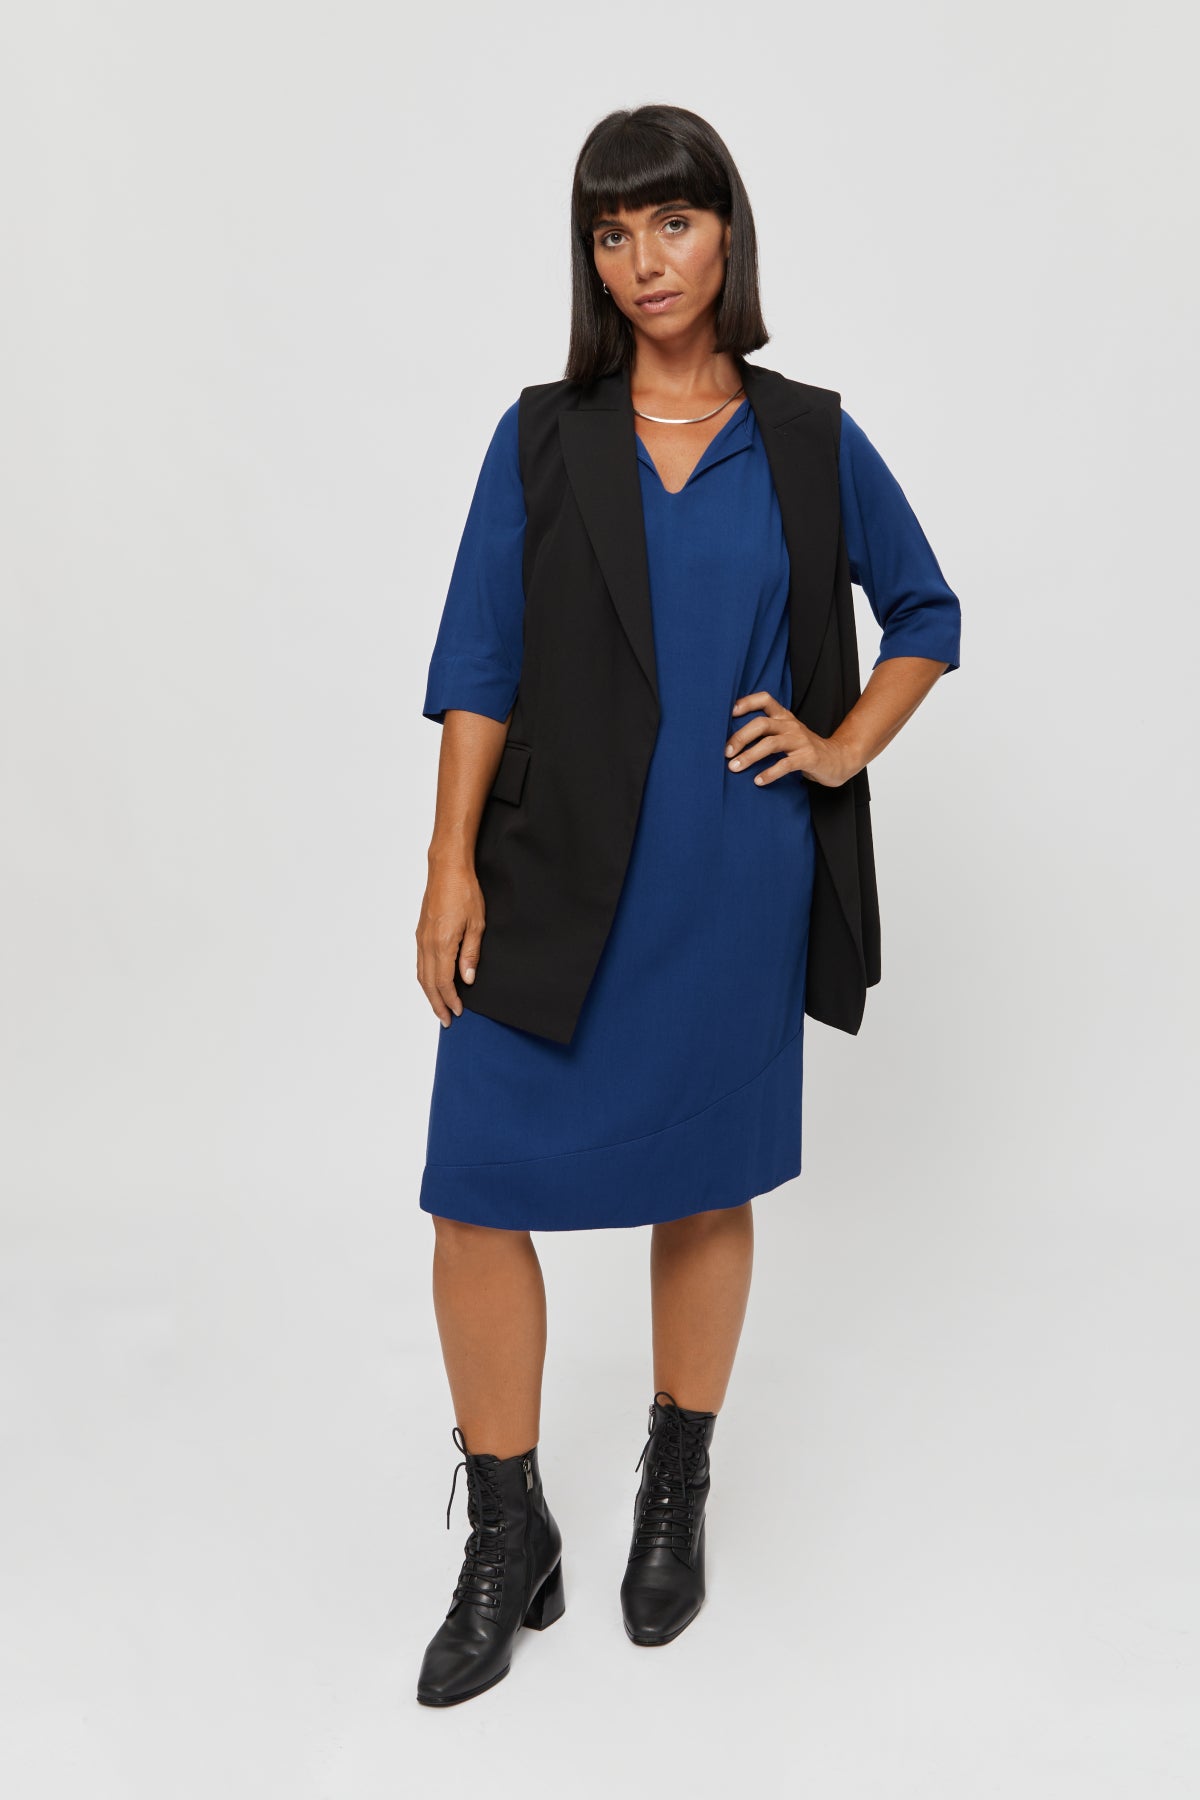 Blue A Line Dress CATHERINE. Formal Midi Work Dress in Blue · Belted Dress with Pockets - AYANI